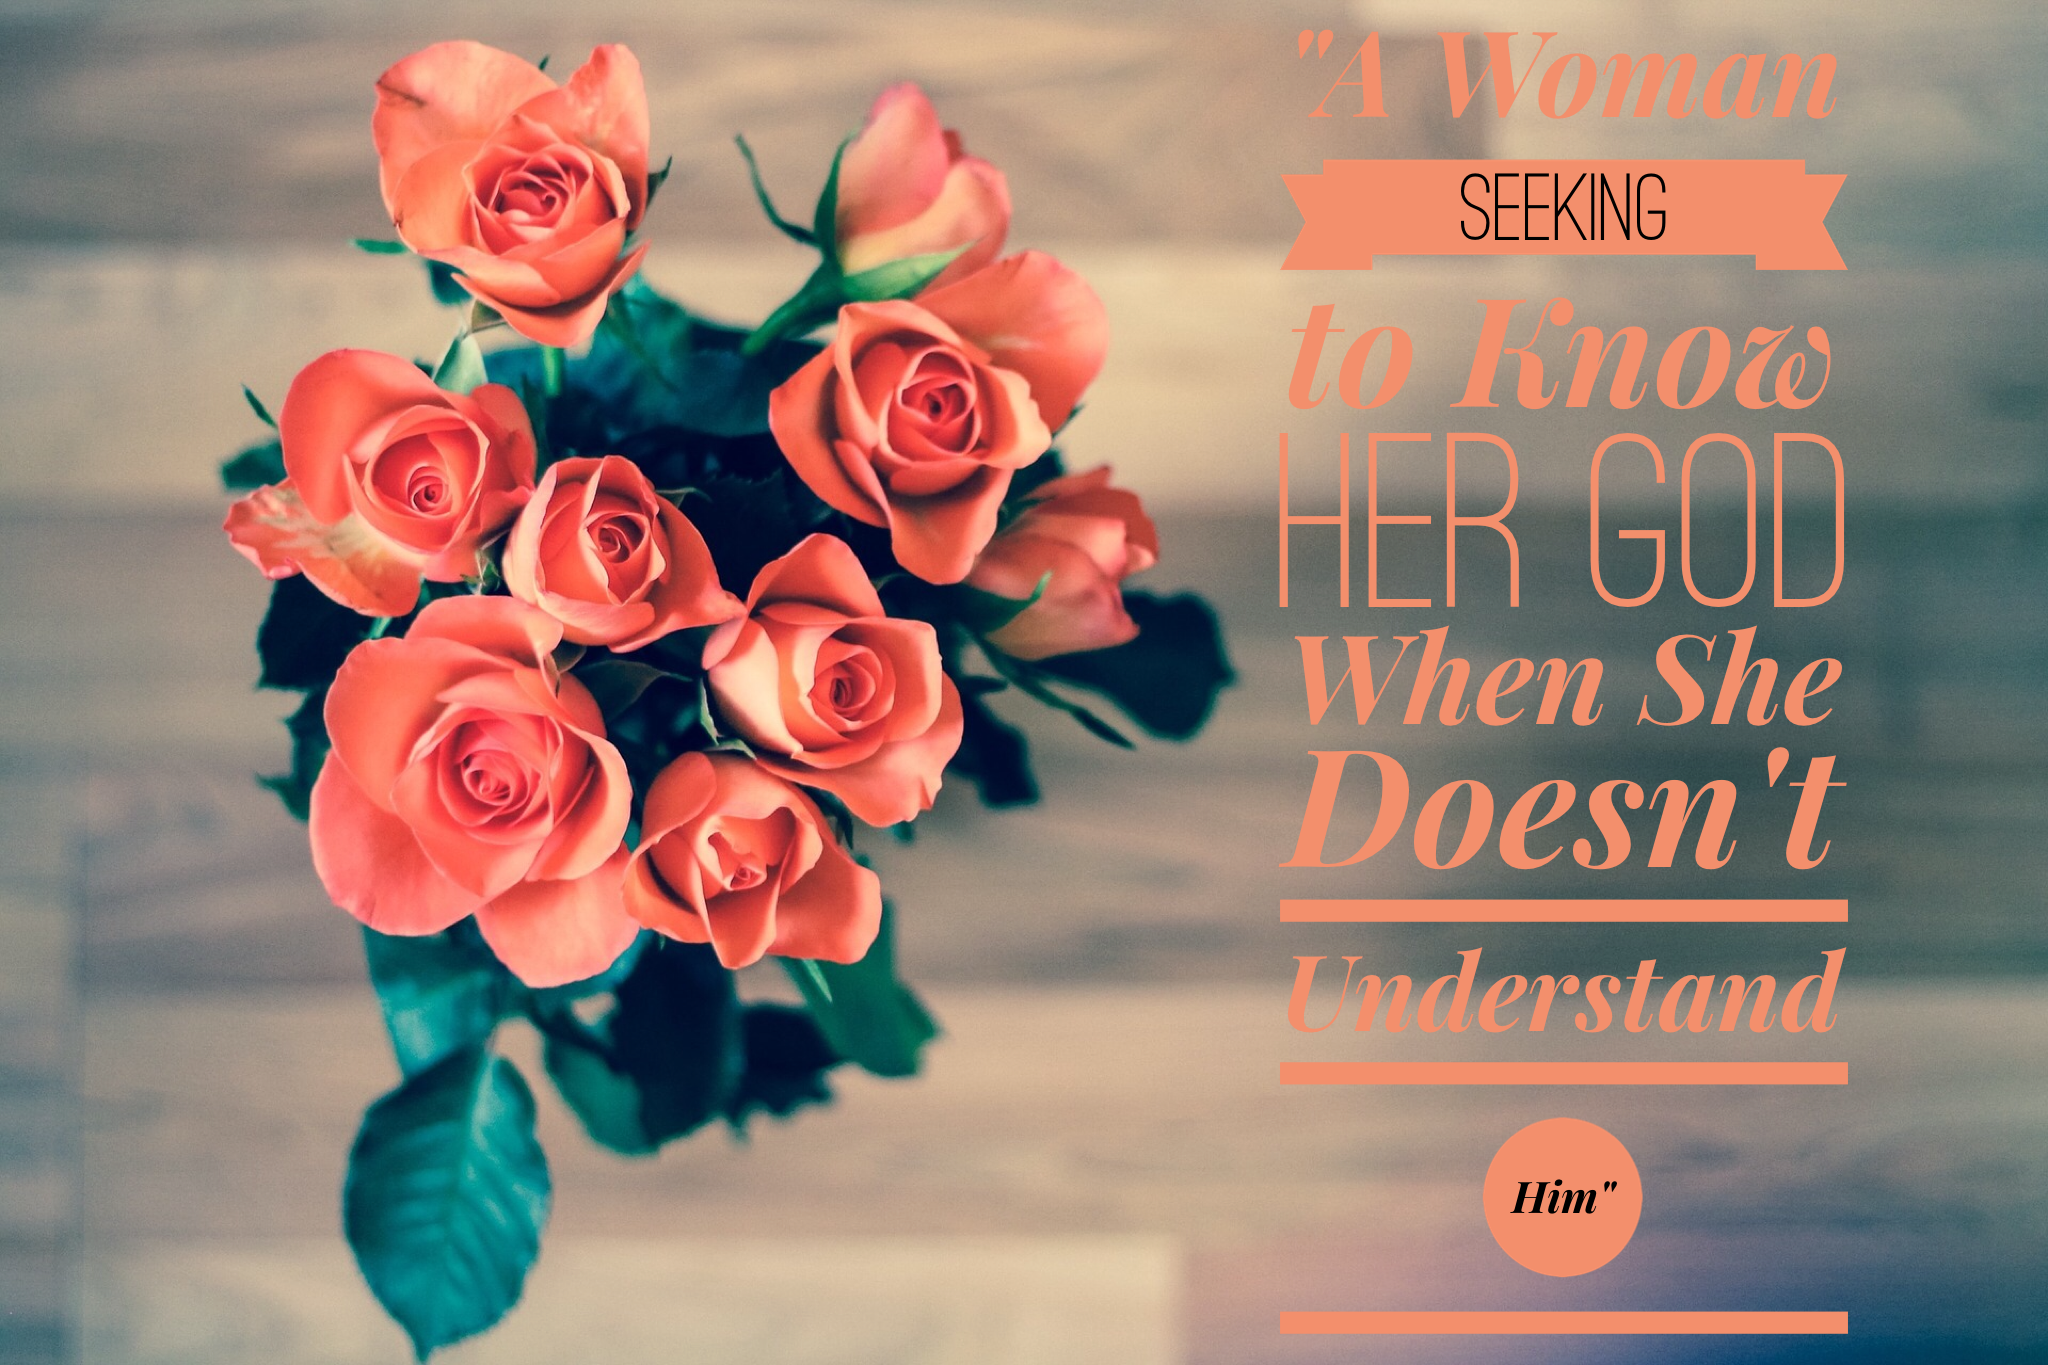 A Woman Seeking to Know Her God When She Doesn't Understand Him | www.codyandras.com/blog/2017/8/3/a-woman-seeking-to-know-her-god-when-she-doesnt-understand-him